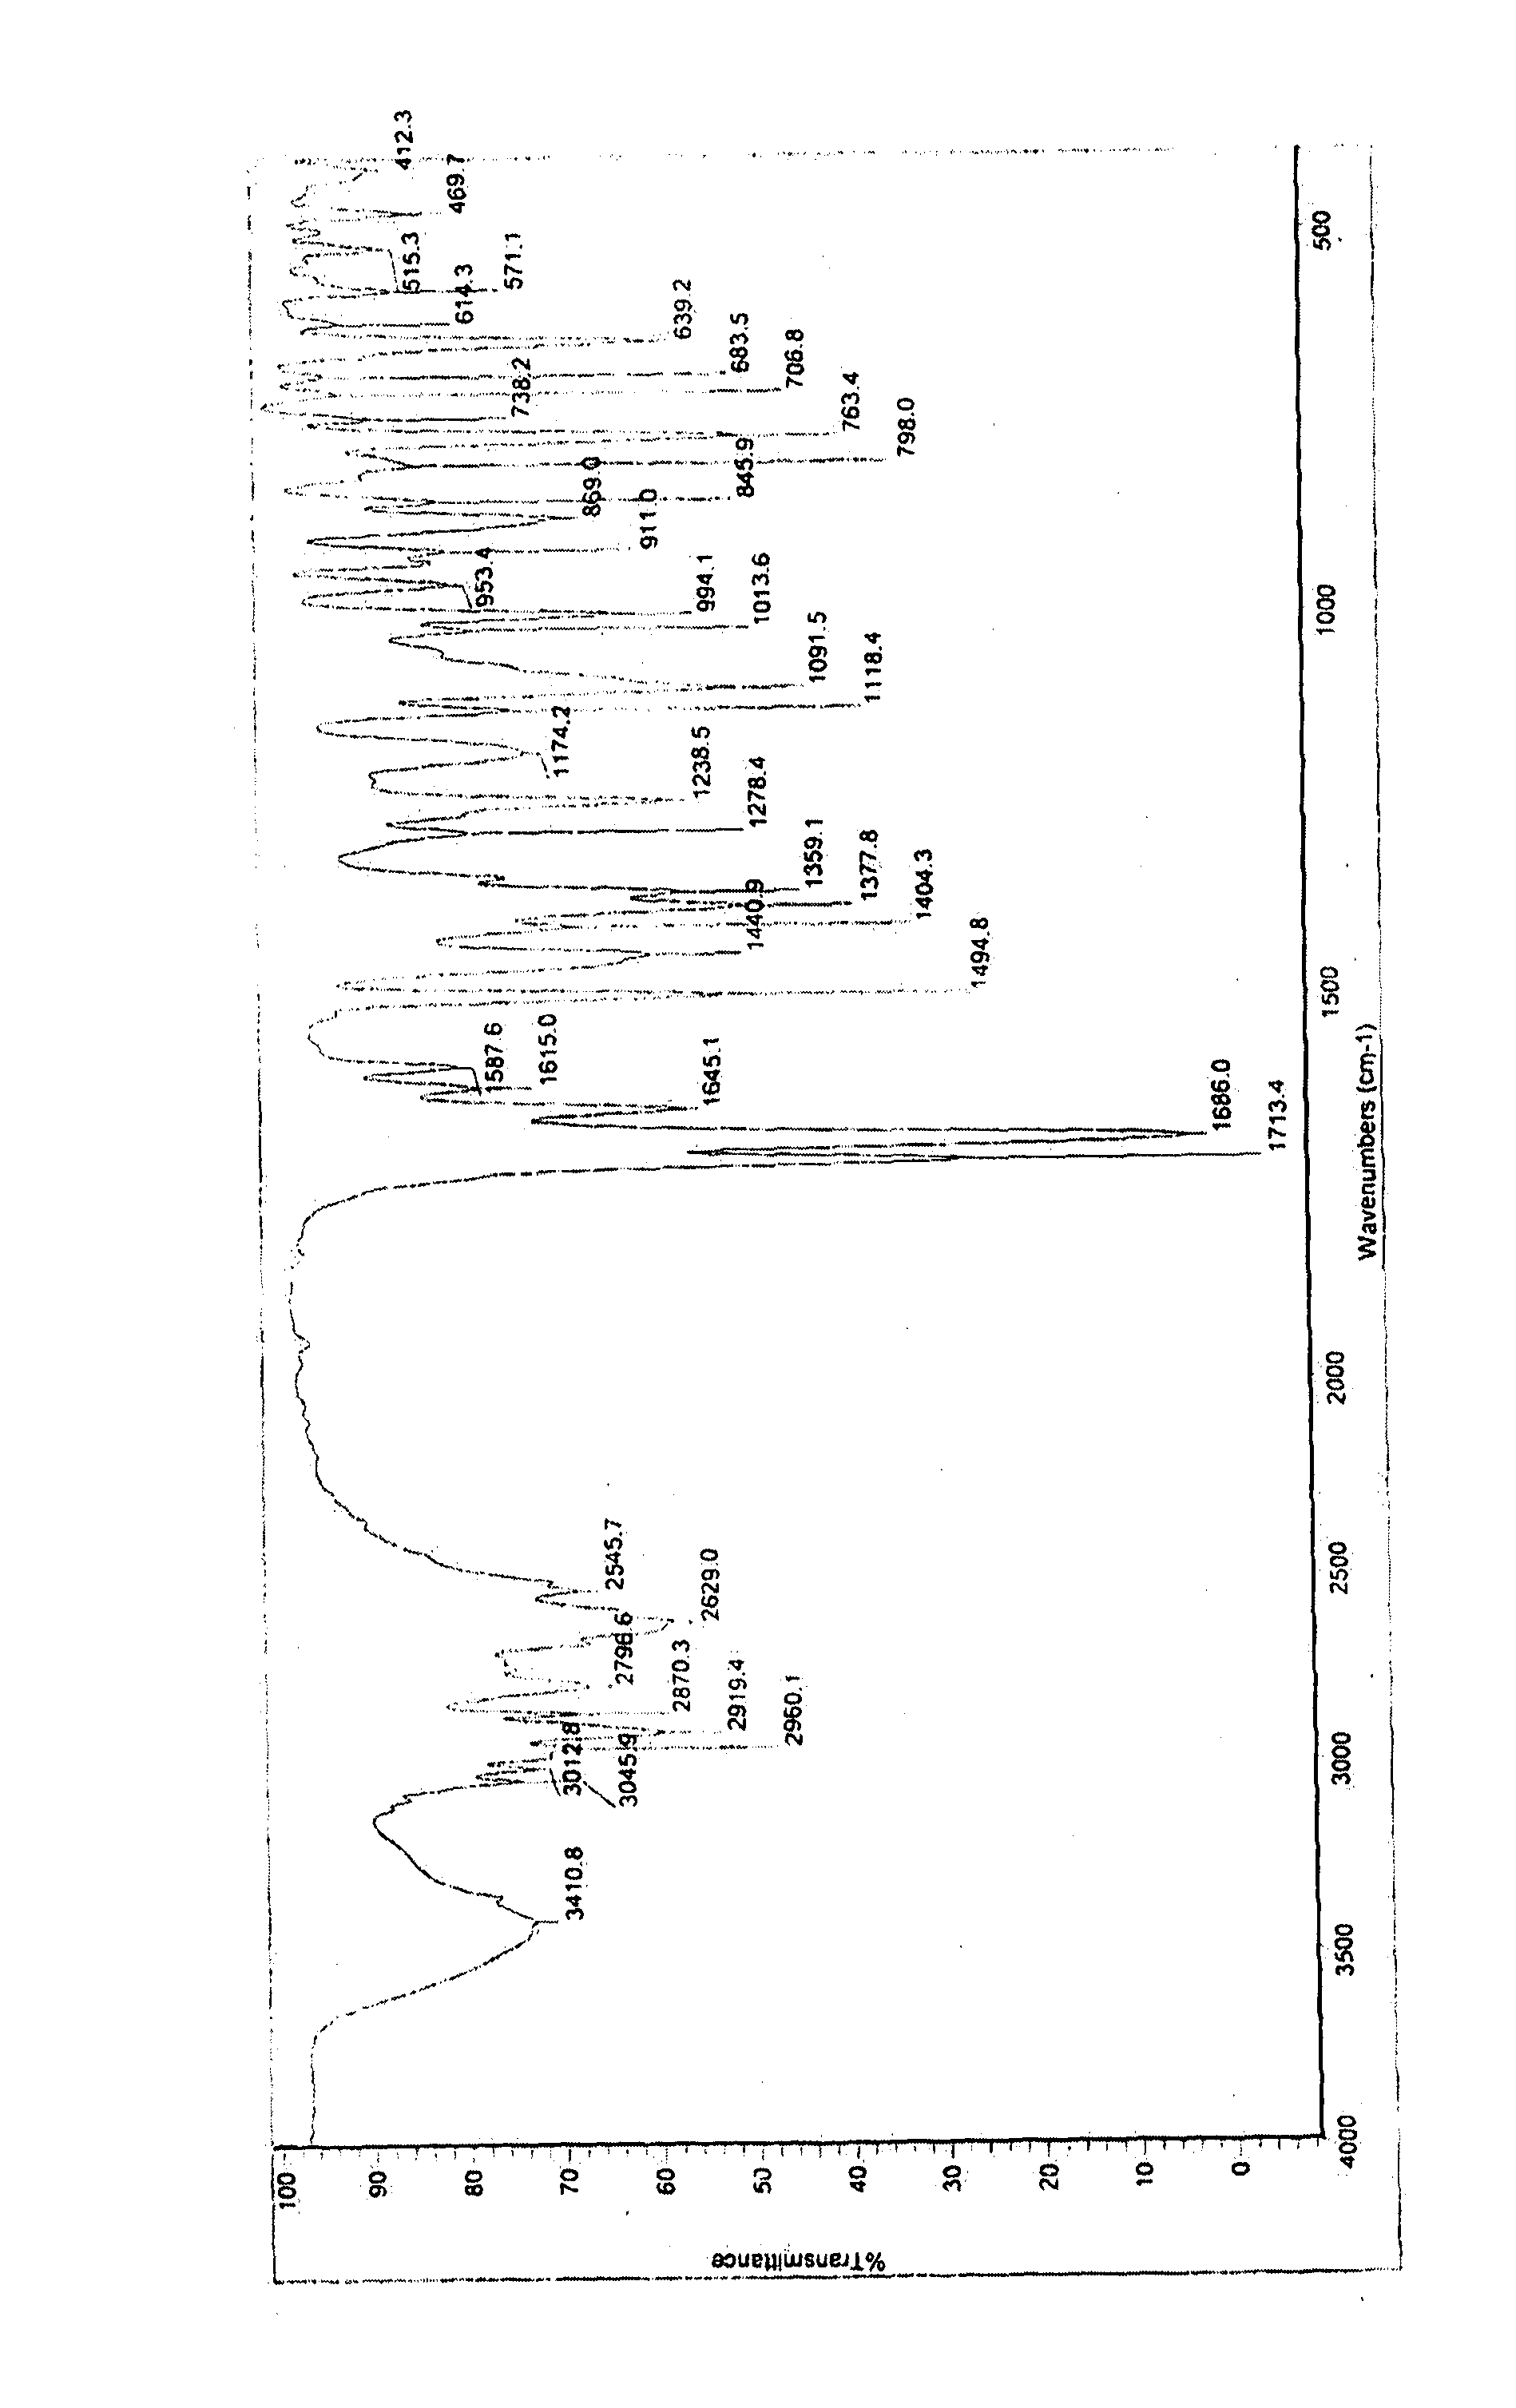 Processes For Preparing Prasugrel And Pharmaceutically Acceptable Salts Thereof